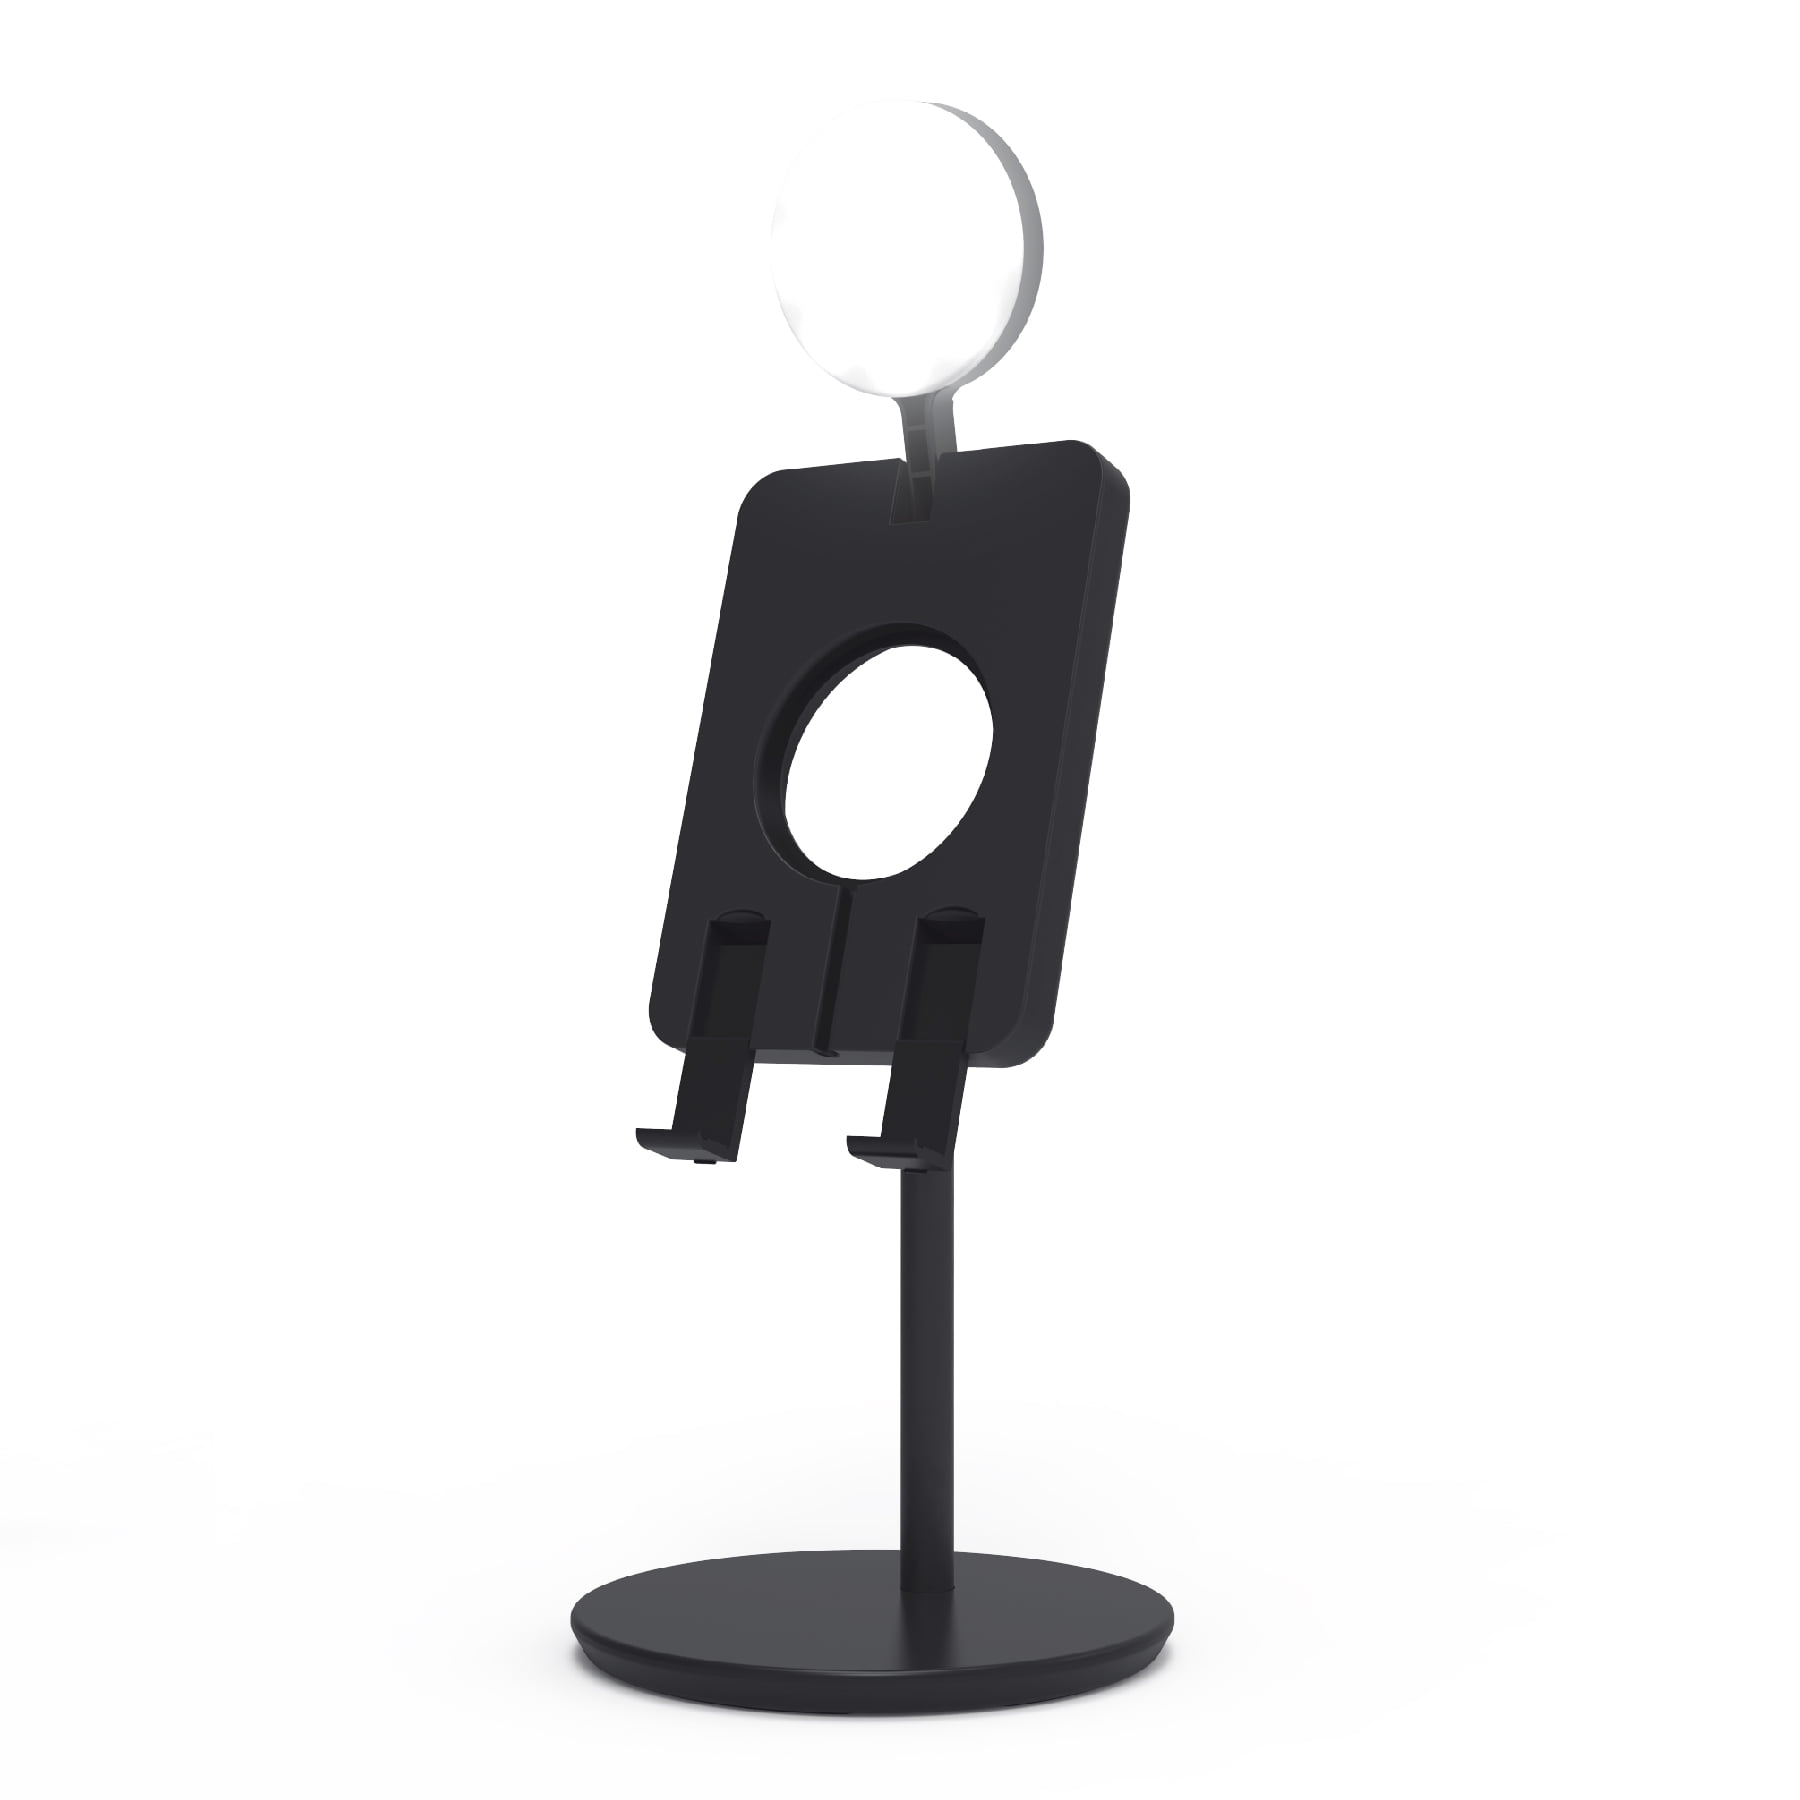 Video Call Light Stand - Desktop Phone Stand with Light and Charger Dock